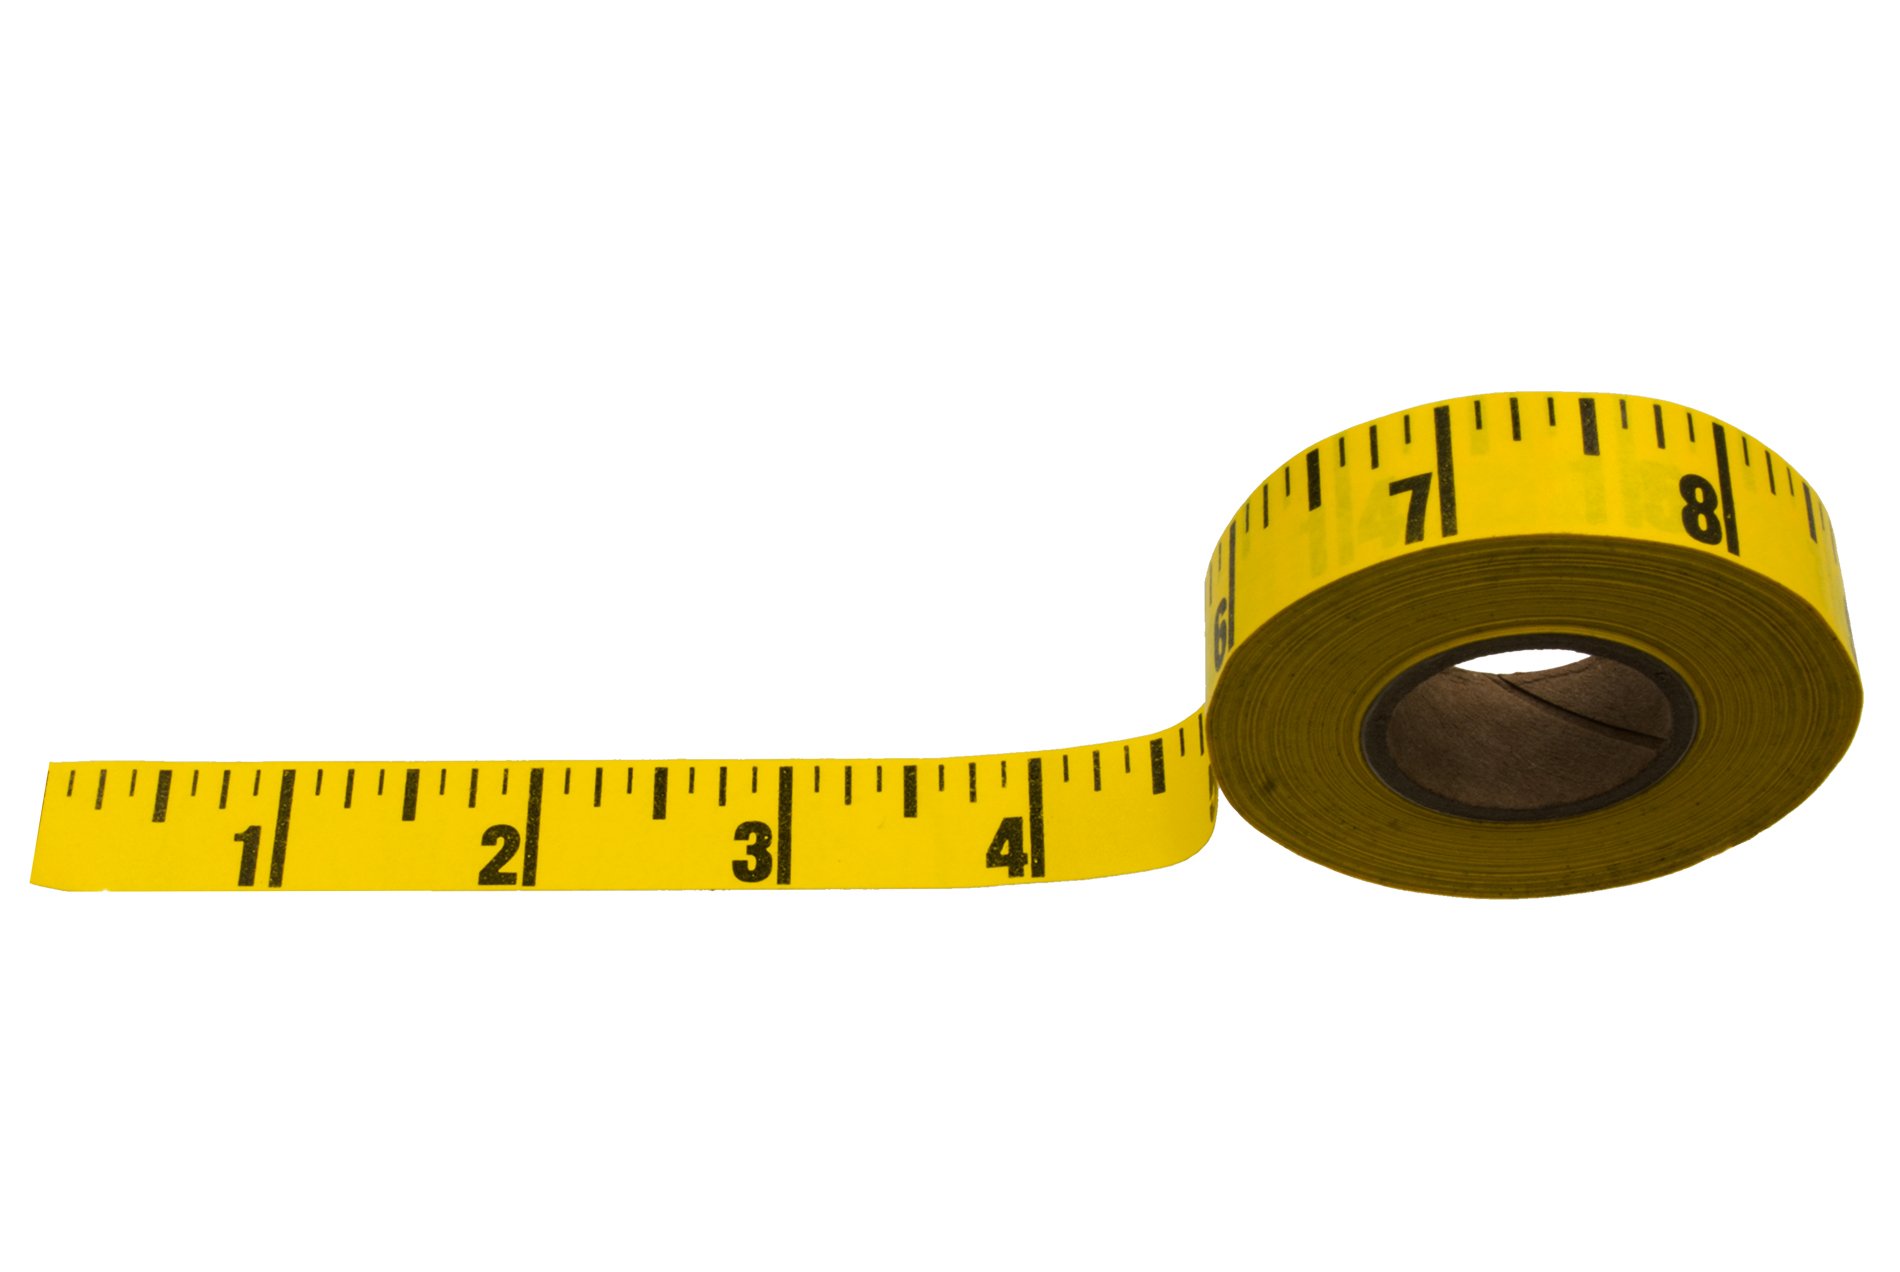 Adhesive Tape Measure Ruler - Adhesive Measuring Tapes with Sticky ...